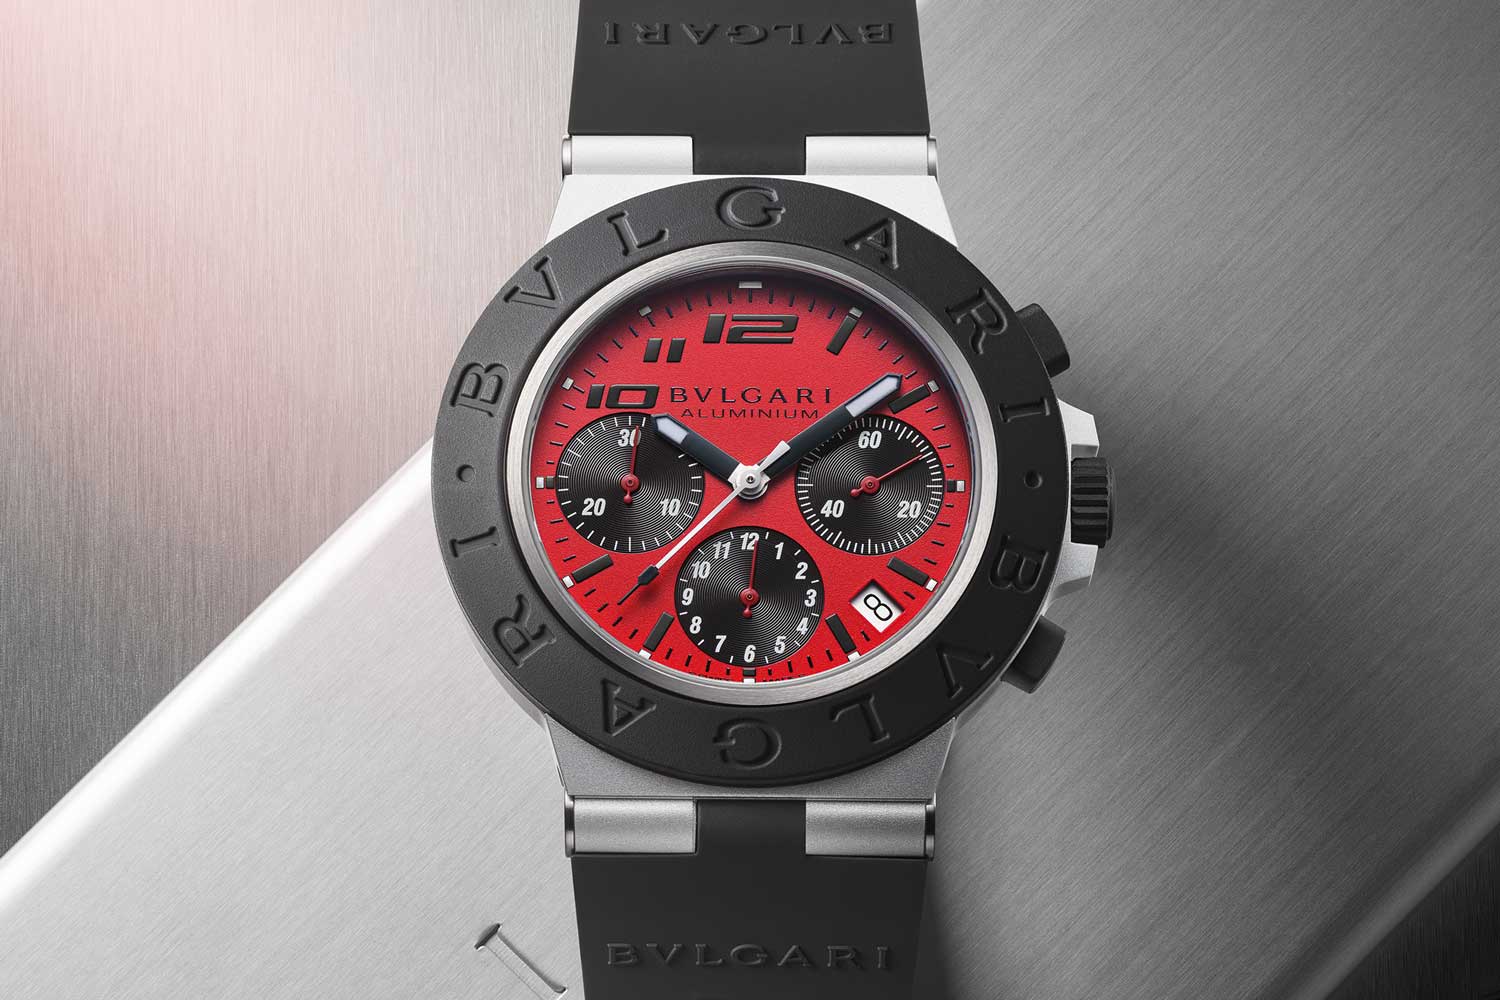 Bvlgari × Ducati collaboration resulting in the Bvlgari Aluminum Chronograph Ducati Special Edition featuring an instantly recognizable dial in Ducati matte red color